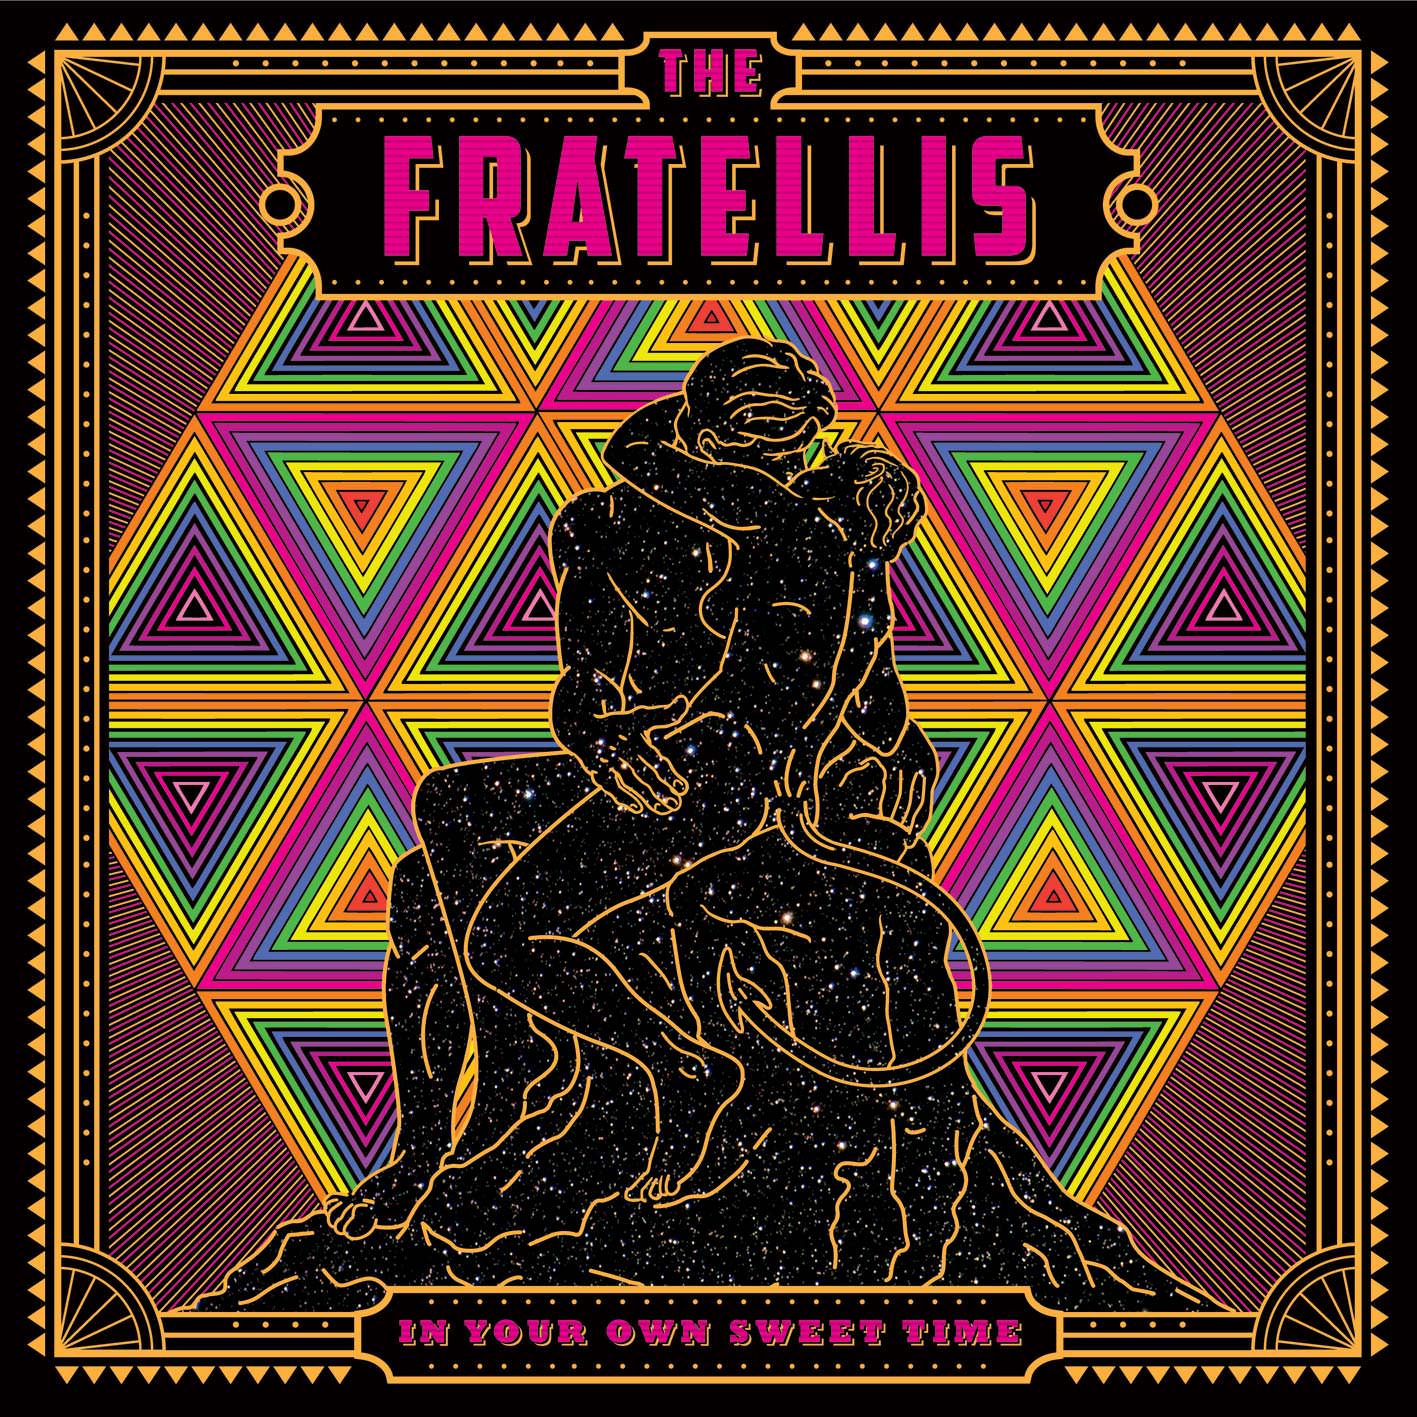 The Fratellis - In Your Own Sweet Time (2018) [7Digital FLAC 24bit/96kHz]